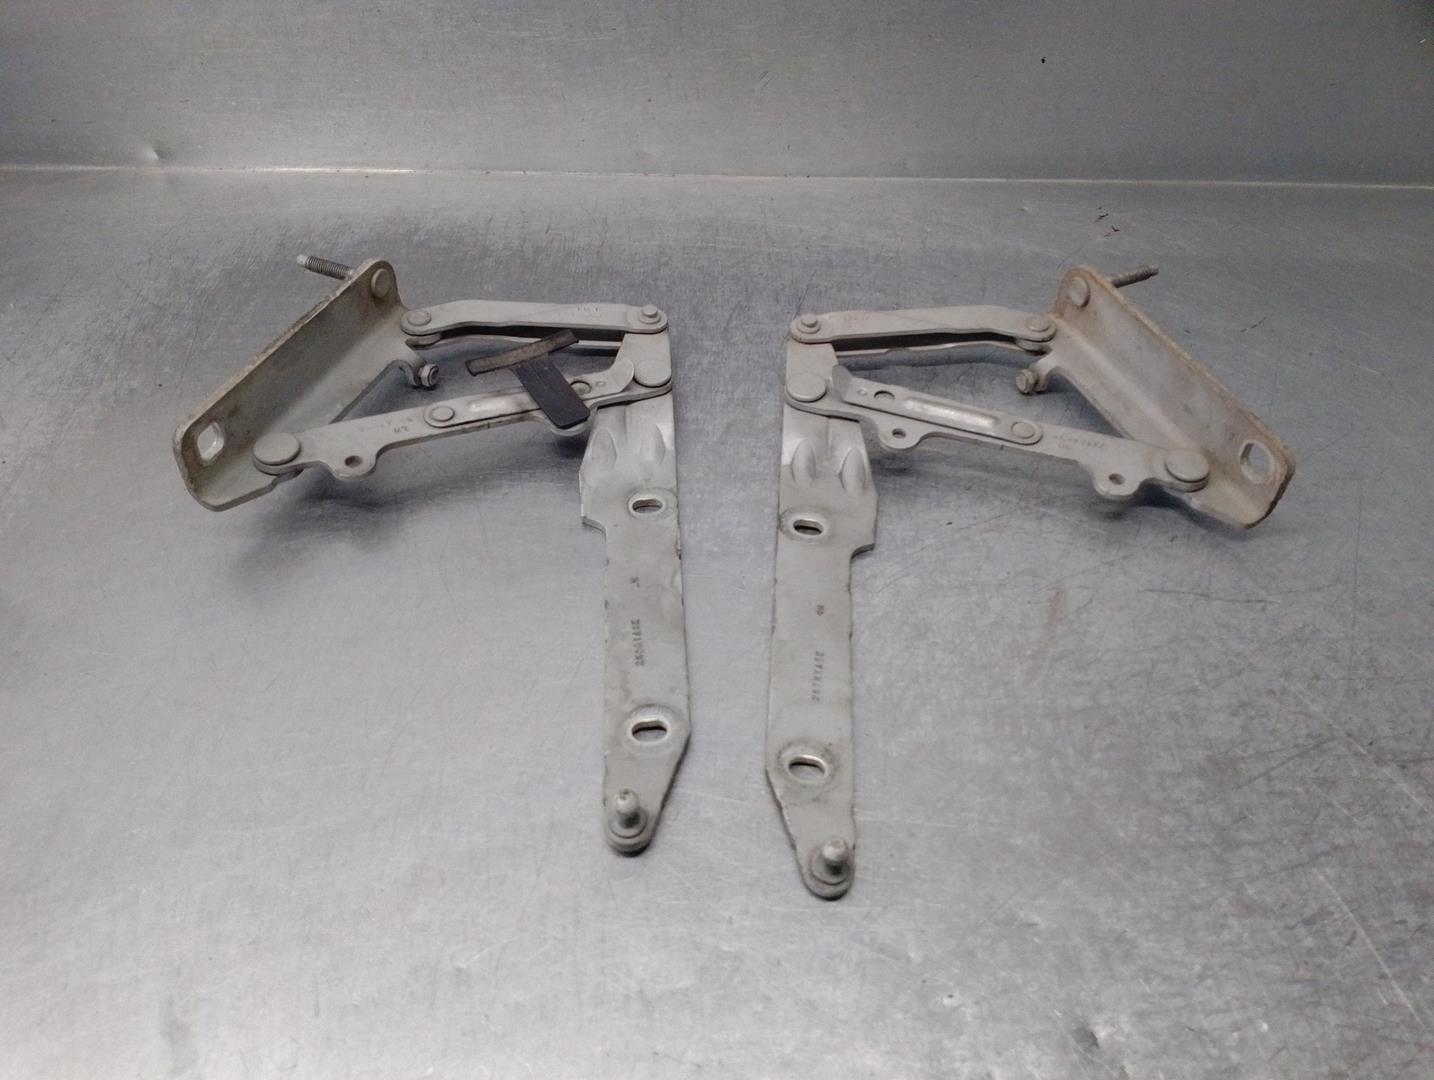 LAND ROVER Discovery 4 generation (2009-2016) Front Right Bonnet Hinge BKB780020, ELPARDER/IZQ, 5PUERTAS 21721461